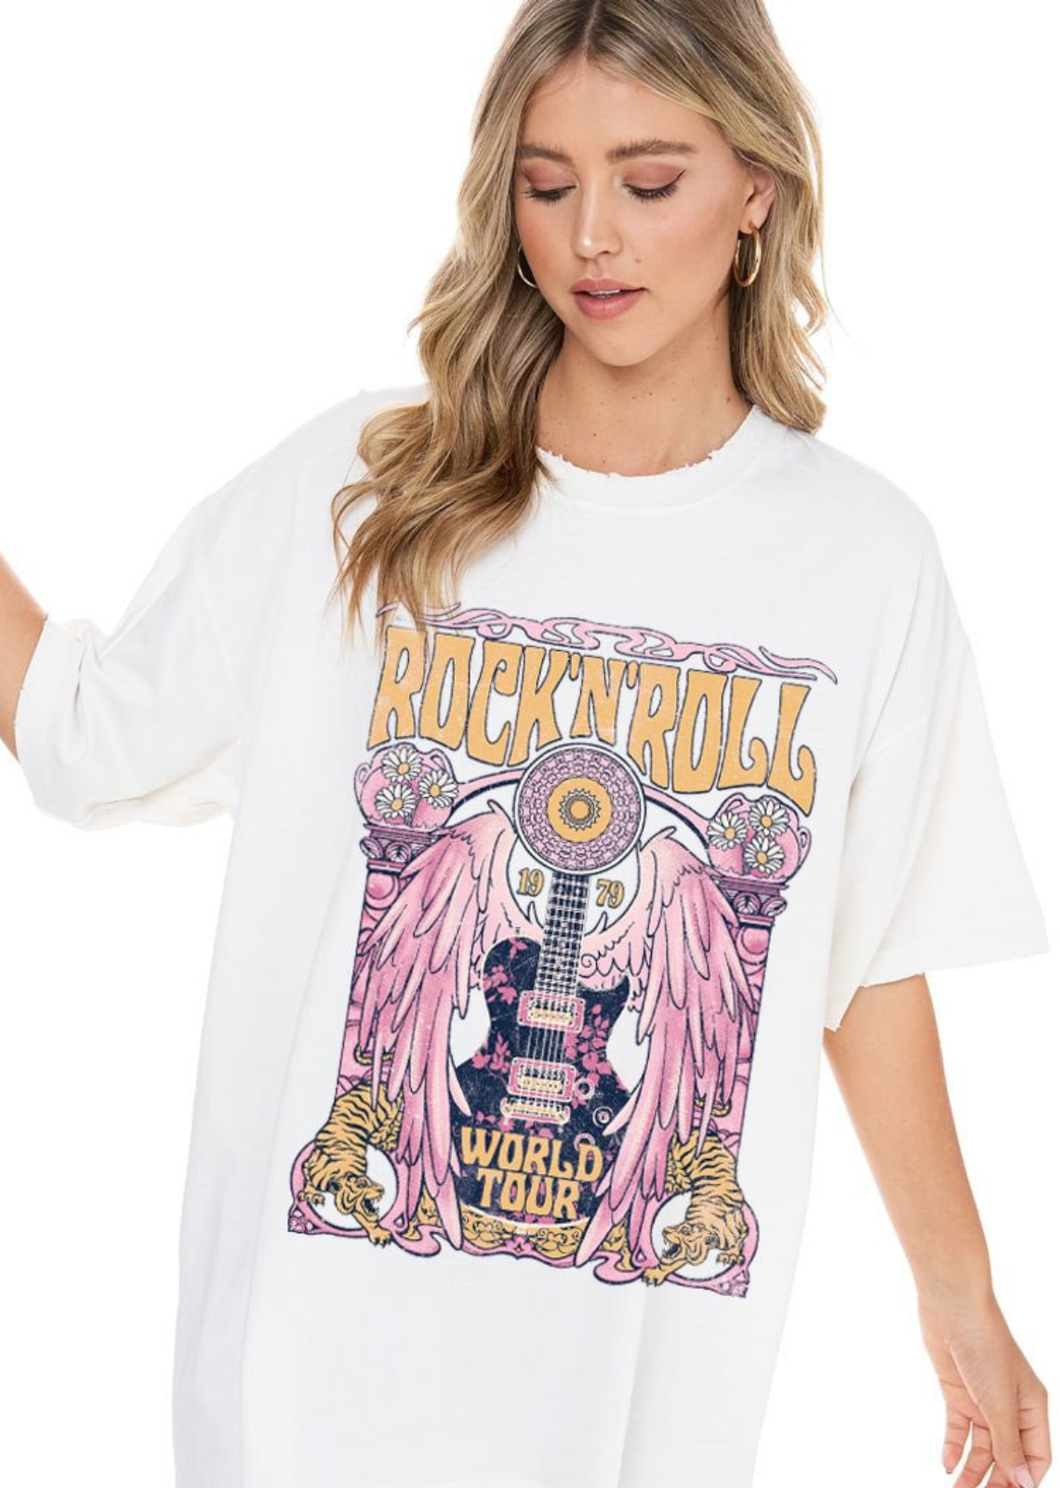 Rock N Roll World Tour 1979 Graphic Tee